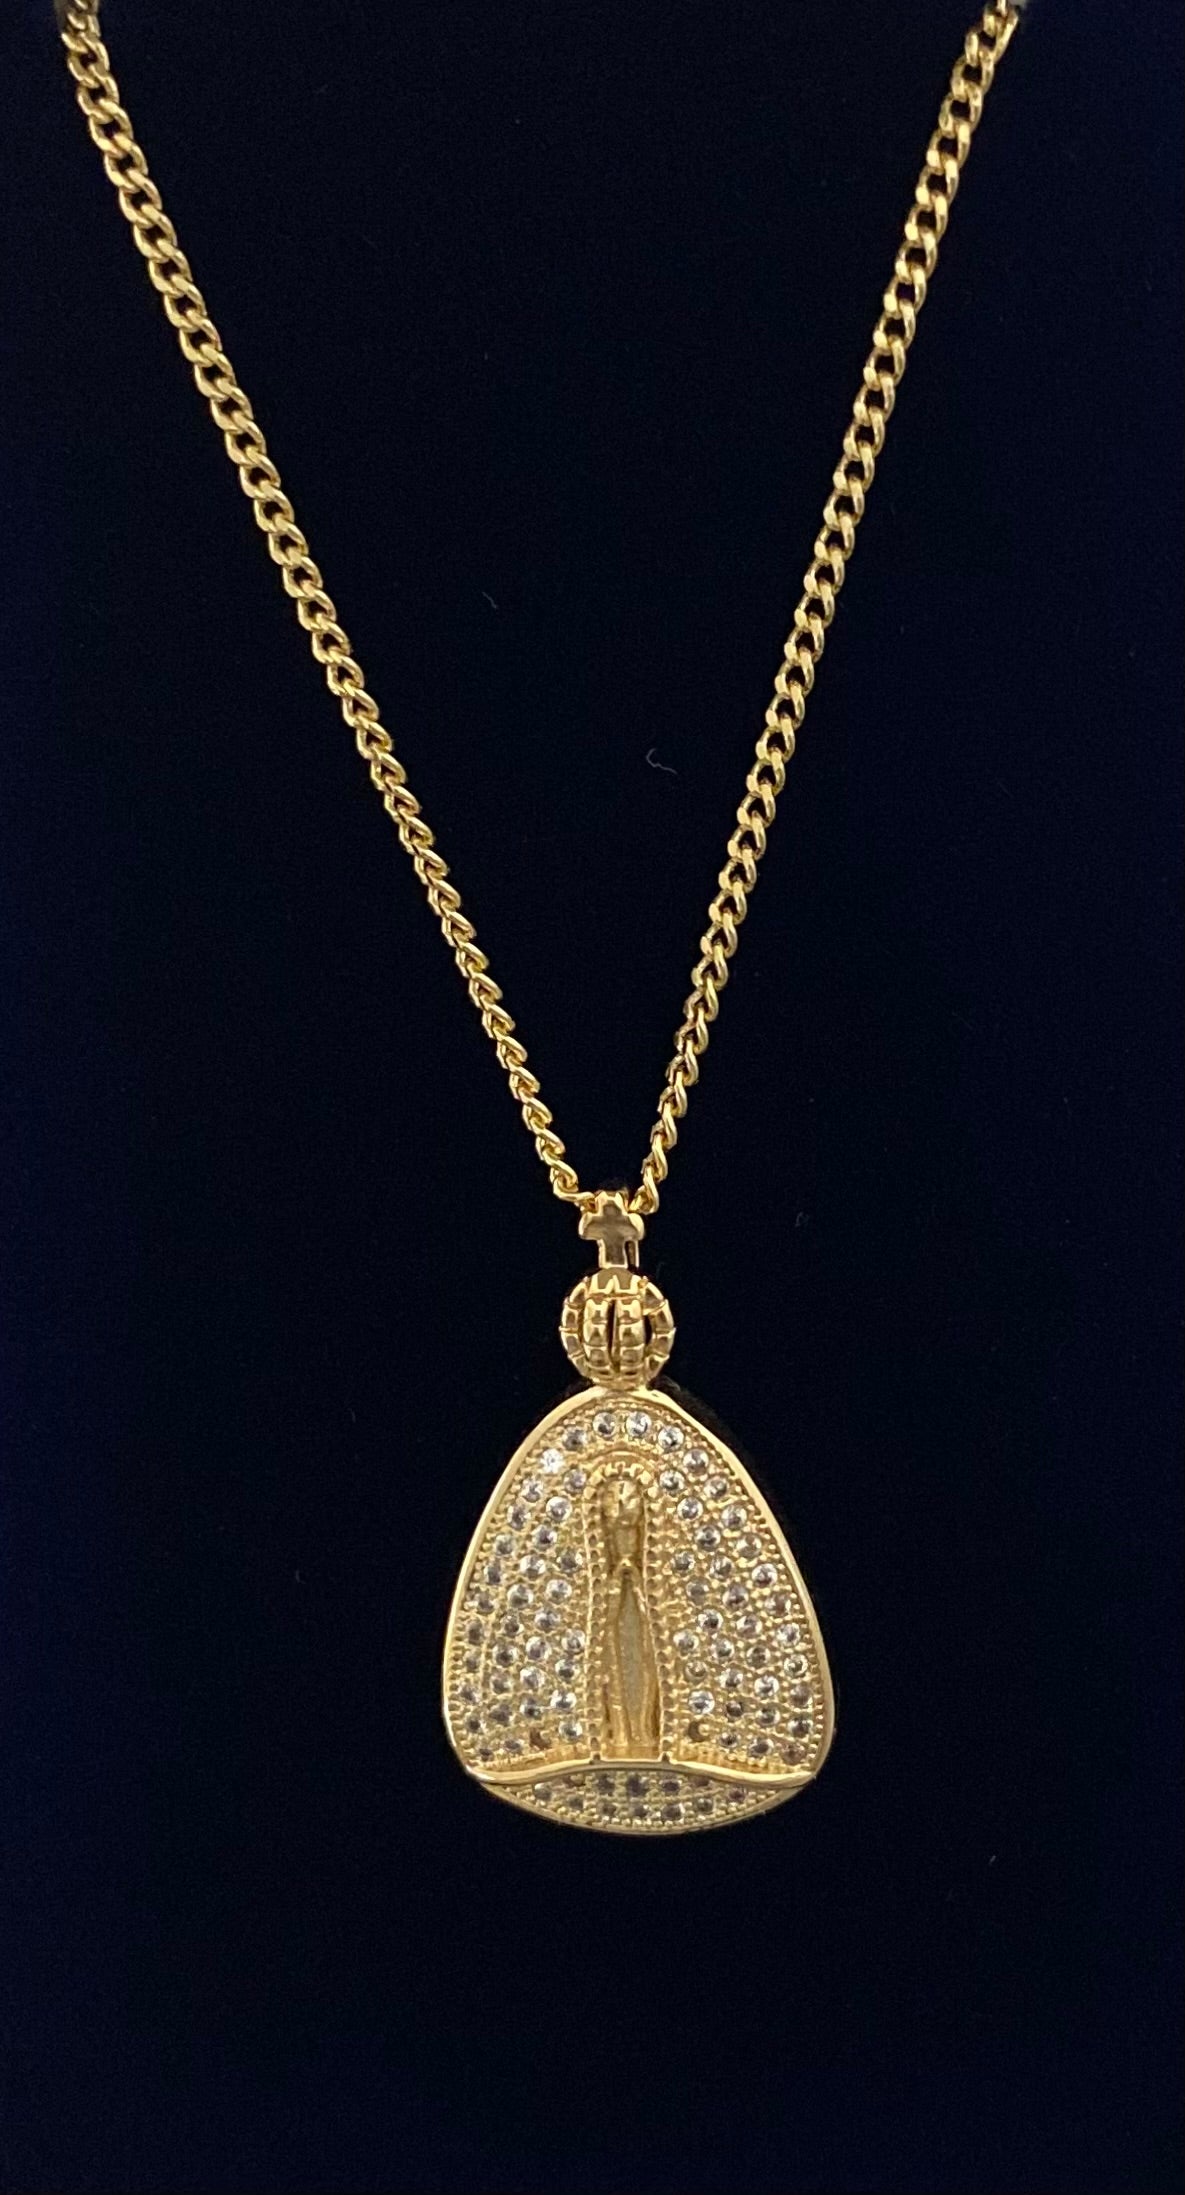 Our Lady of Charity (Caridad del Cobre) 14k gf with crystals charm and necklace